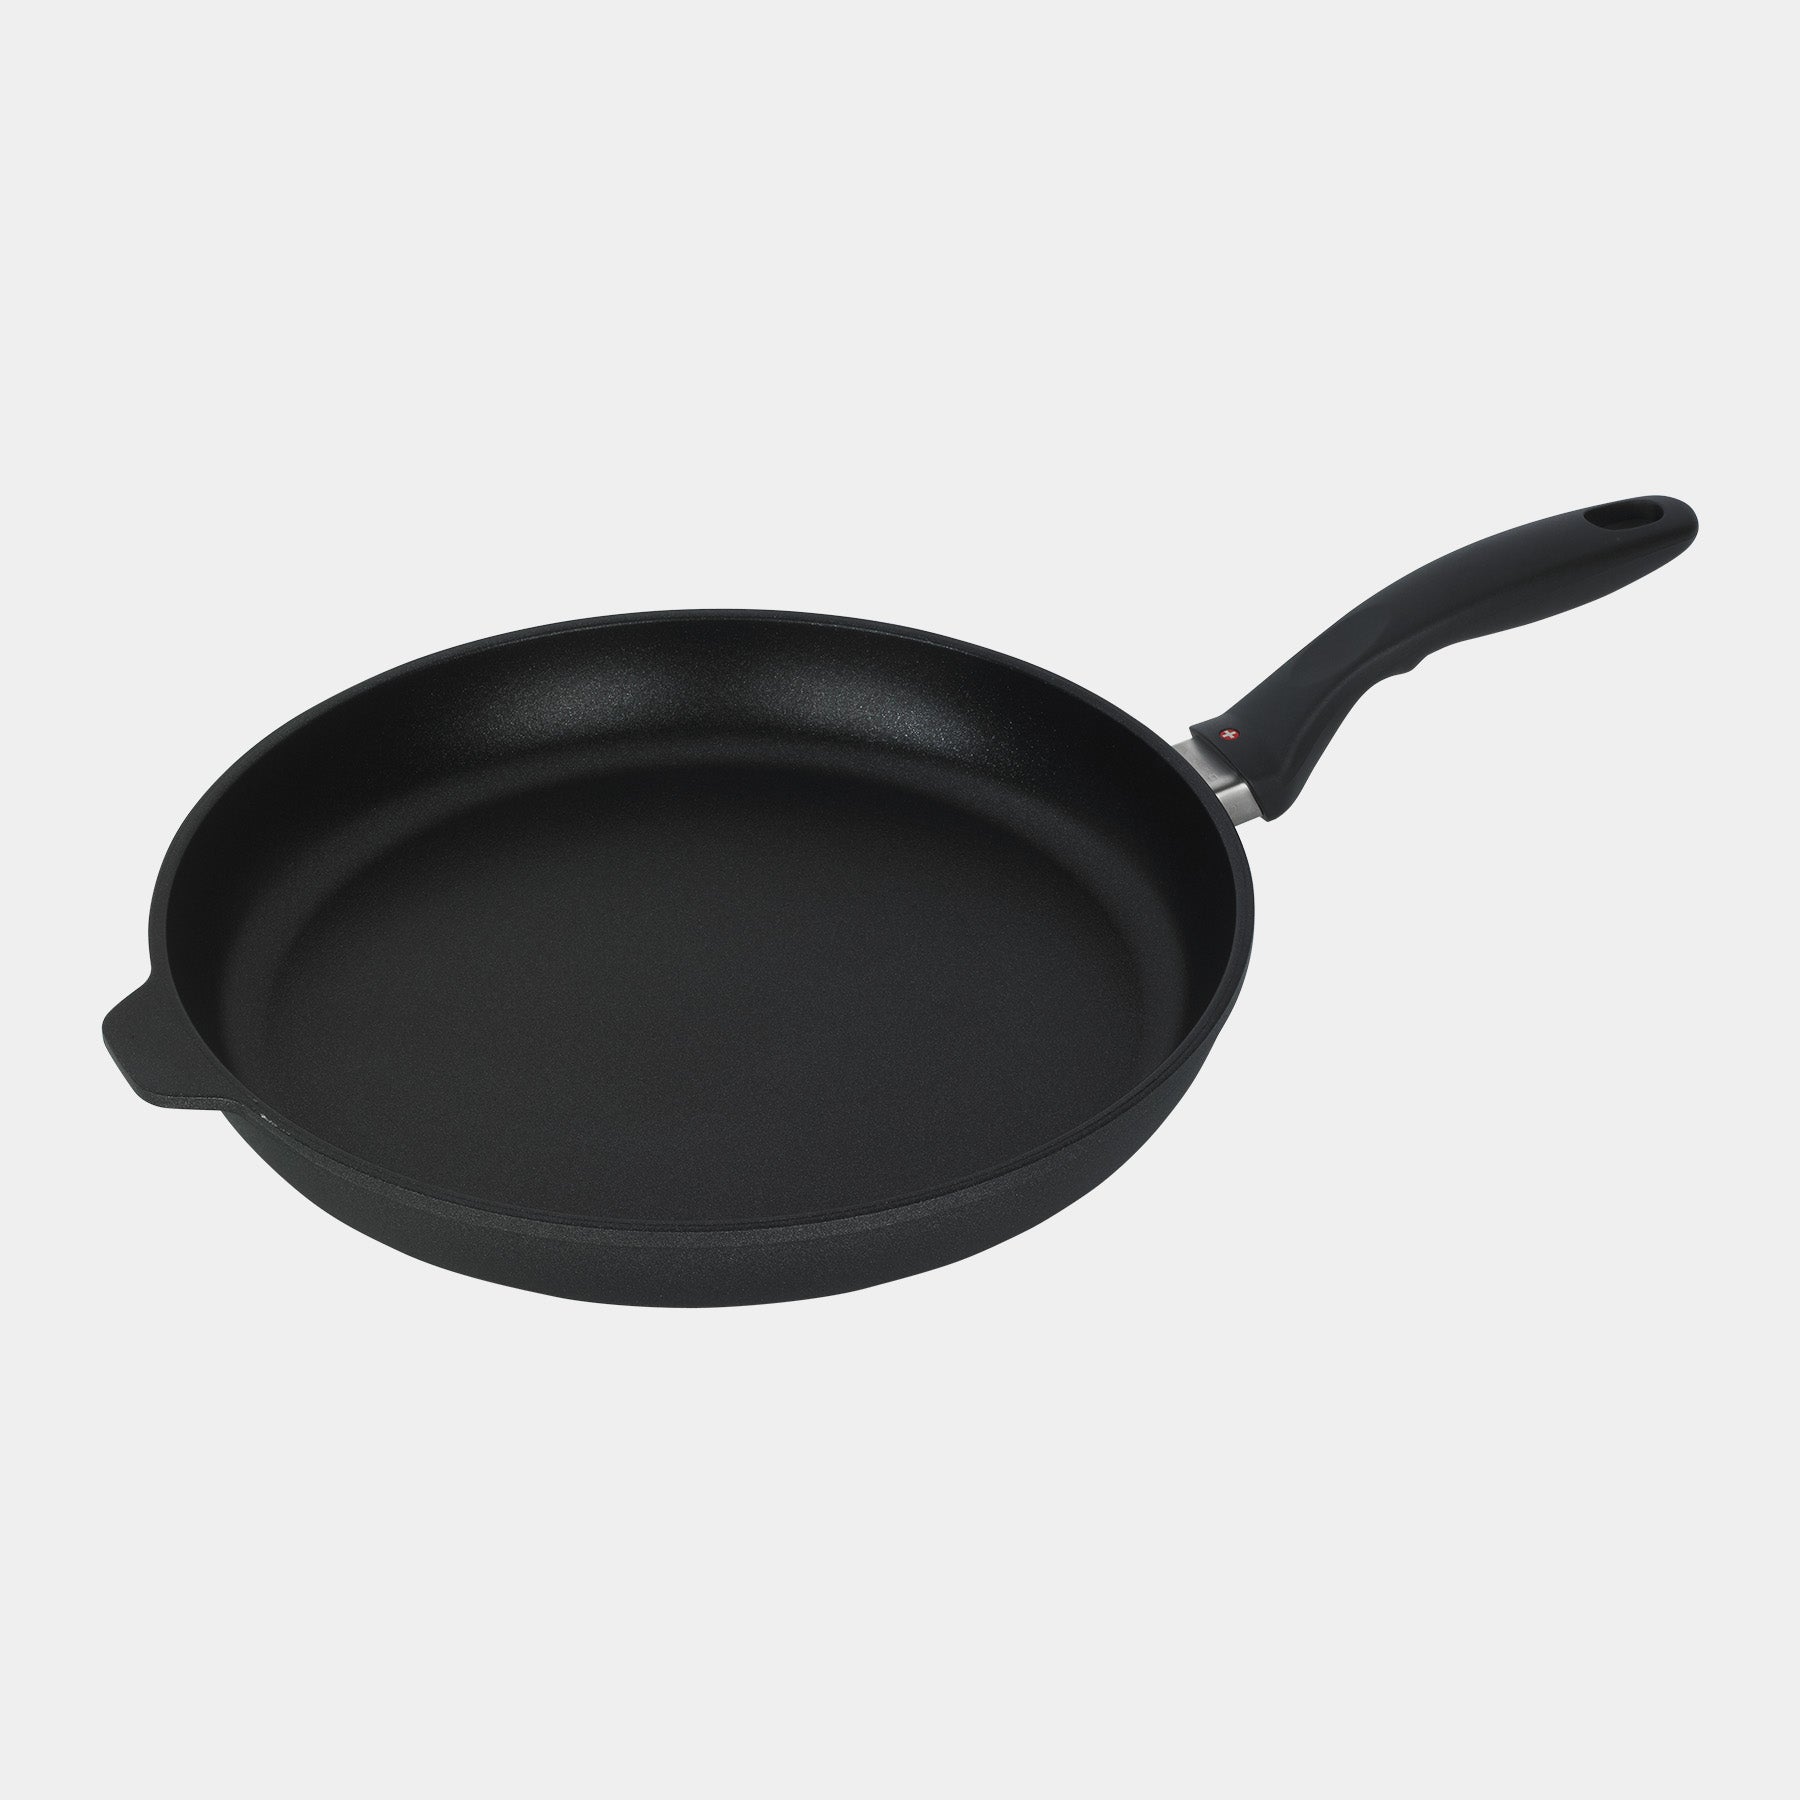 XD Nonstick 12.5" Fry Pan - Induction top view